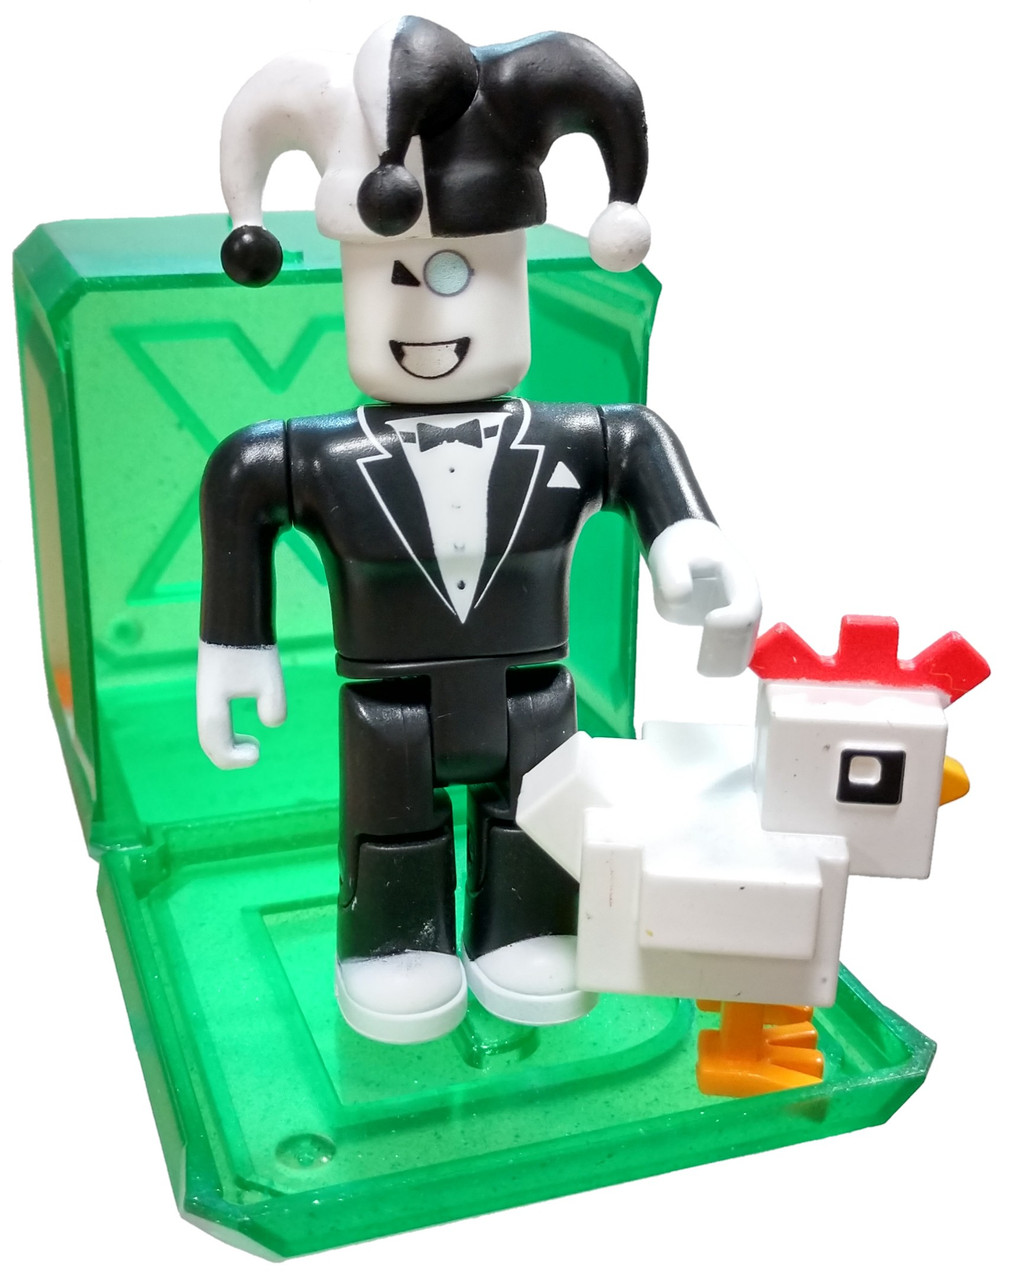 Roblox Celebrity Collection Series 4 Sirming 3 Mini Figure With Green Cube And Online Code Loose Jazwares Toywiz - roblox celebrity collection series 4 mystery box green cube